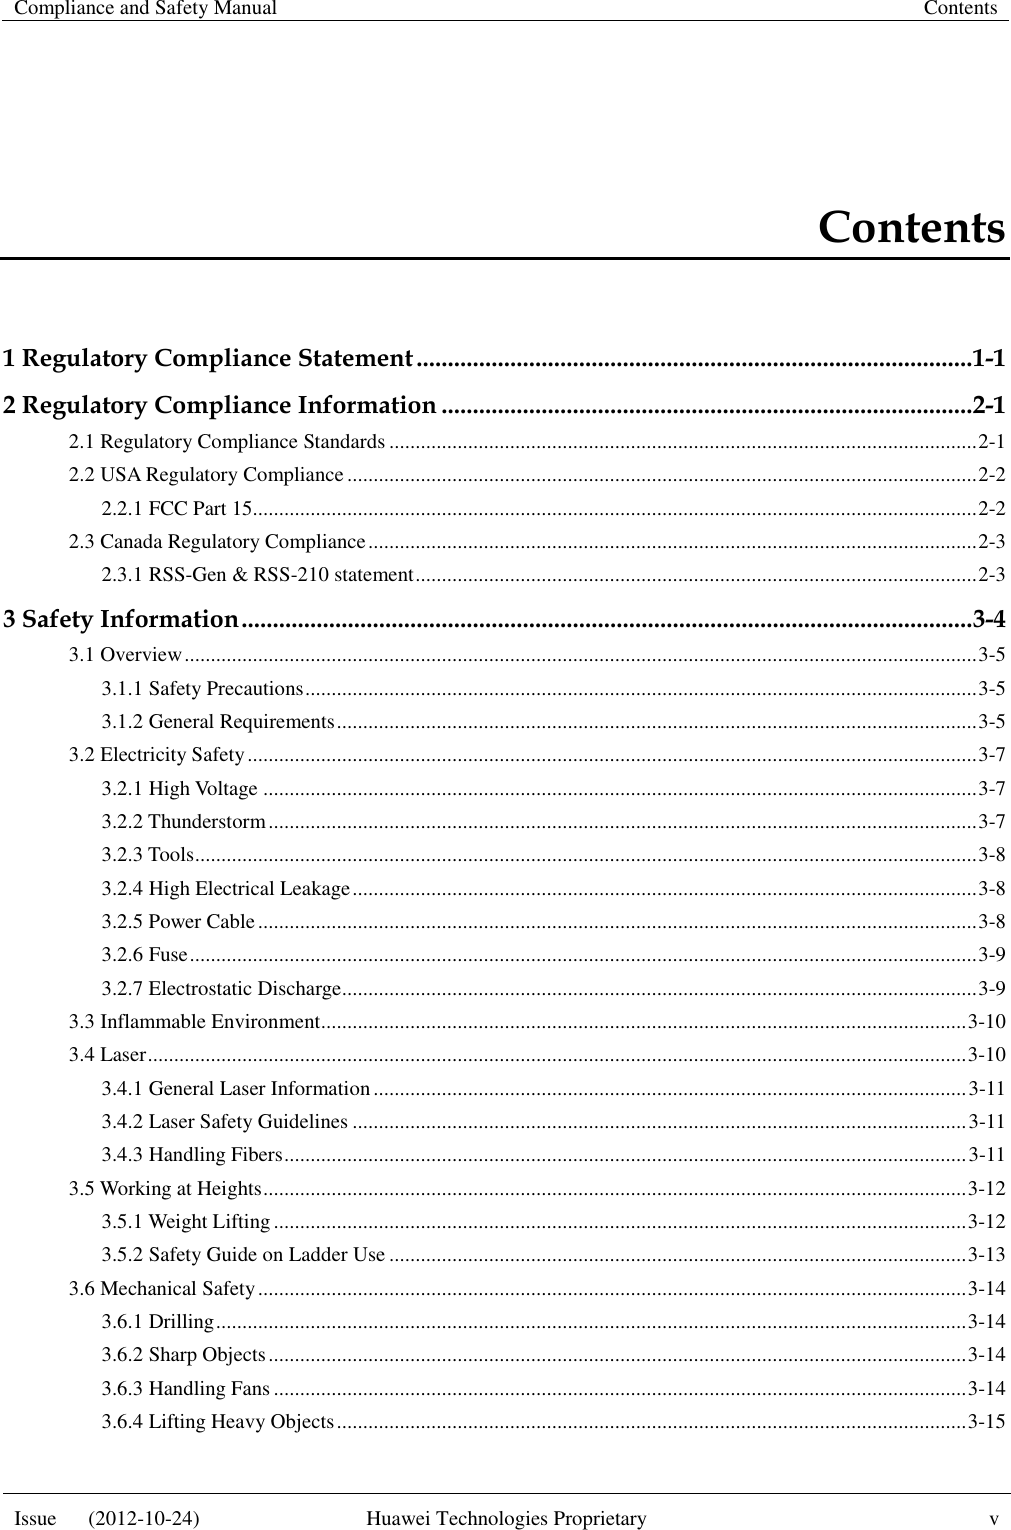 Compliance and Safety Manual Contents  Issue      (2012-10-24) Huawei Technologies Proprietary v  Contents 1 Regulatory Compliance Statement ......................................................................................... 1-1 2 Regulatory Compliance Information ..................................................................................... 2-1 2.1 Regulatory Compliance Standards ................................................................................................................ 2-1 2.2 USA Regulatory Compliance ........................................................................................................................ 2-2 2.2.1 FCC Part 15.......................................................................................................................................... 2-2 2.3 Canada Regulatory Compliance .................................................................................................................... 2-3 2.3.1 RSS-Gen &amp; RSS-210 statement ........................................................................................................... 2-3 3 Safety Information ..................................................................................................................... 3-4 3.1 Overview ....................................................................................................................................................... 3-5 3.1.1 Safety Precautions ................................................................................................................................ 3-5 3.1.2 General Requirements .......................................................................................................................... 3-5 3.2 Electricity Safety ........................................................................................................................................... 3-7 3.2.1 High Voltage ........................................................................................................................................ 3-7 3.2.2 Thunderstorm ....................................................................................................................................... 3-7 3.2.3 Tools ..................................................................................................................................................... 3-8 3.2.4 High Electrical Leakage ....................................................................................................................... 3-8 3.2.5 Power Cable ......................................................................................................................................... 3-8 3.2.6 Fuse ...................................................................................................................................................... 3-9 3.2.7 Electrostatic Discharge......................................................................................................................... 3-9 3.3 Inflammable Environment ........................................................................................................................... 3-10 3.4 Laser ............................................................................................................................................................ 3-10 3.4.1 General Laser Information ................................................................................................................. 3-11 3.4.2 Laser Safety Guidelines ..................................................................................................................... 3-11 3.4.3 Handling Fibers .................................................................................................................................. 3-11 3.5 Working at Heights ...................................................................................................................................... 3-12 3.5.1 Weight Lifting .................................................................................................................................... 3-12 3.5.2 Safety Guide on Ladder Use .............................................................................................................. 3-13 3.6 Mechanical Safety ....................................................................................................................................... 3-14 3.6.1 Drilling ............................................................................................................................................... 3-14 3.6.2 Sharp Objects ..................................................................................................................................... 3-14 3.6.3 Handling Fans .................................................................................................................................... 3-14 3.6.4 Lifting Heavy Objects ........................................................................................................................ 3-15 